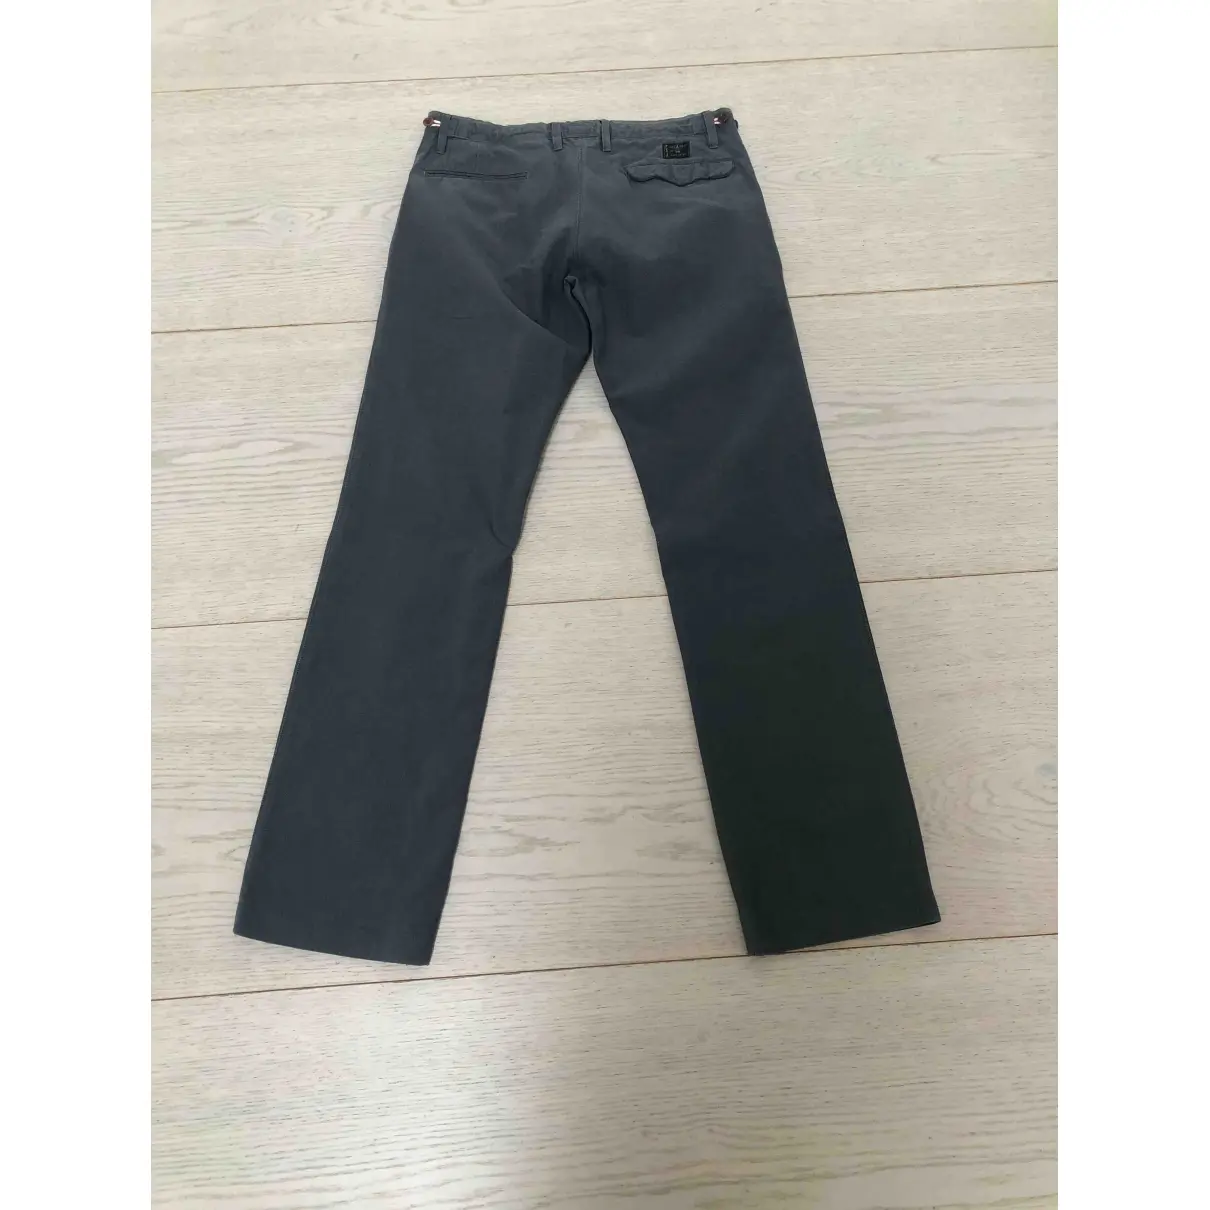 Paul Smith Straight jeans for sale